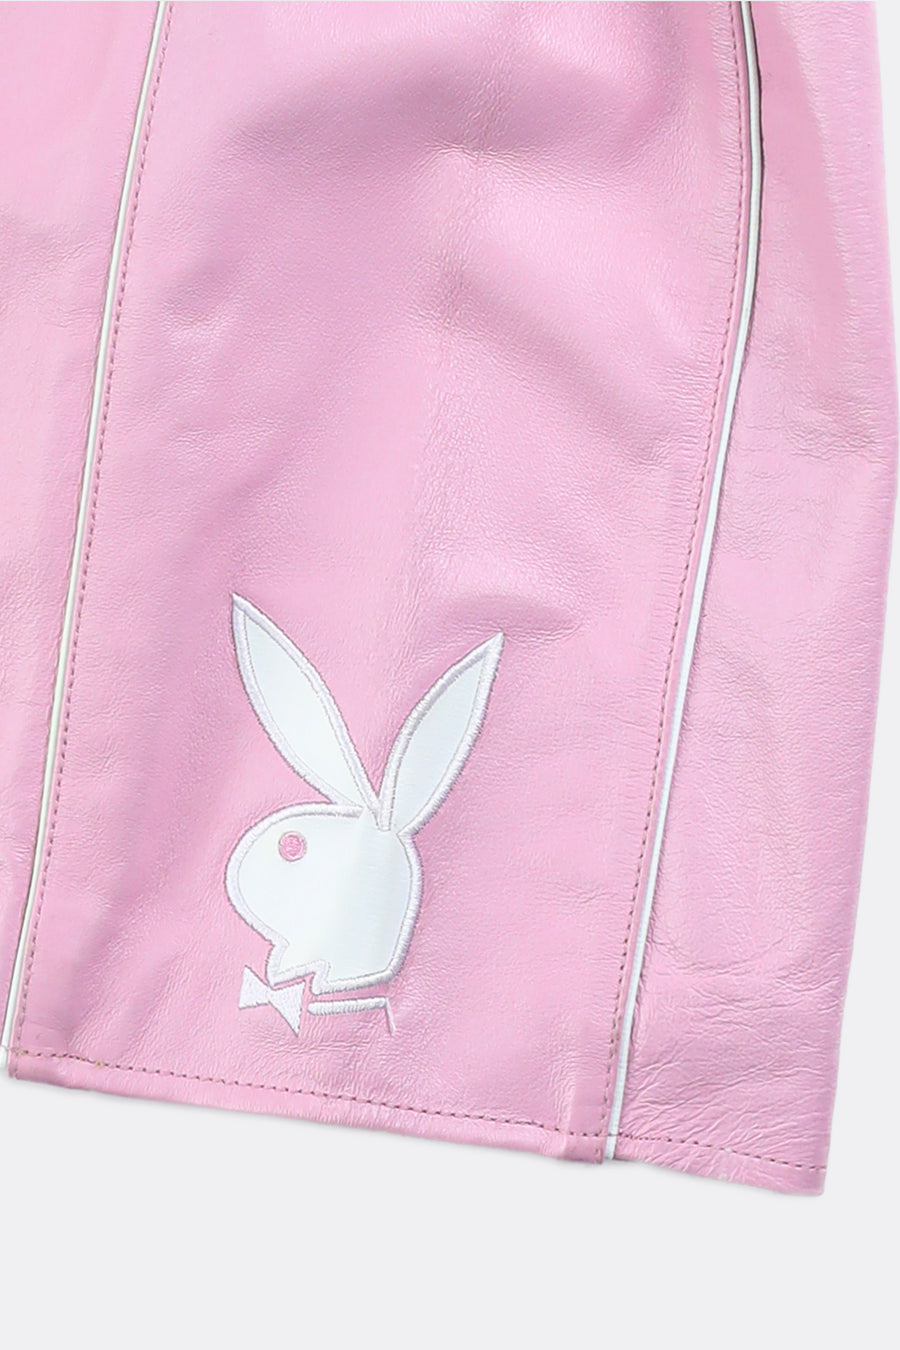 Deadstock Playboy Leather Skirt - SIZE 4